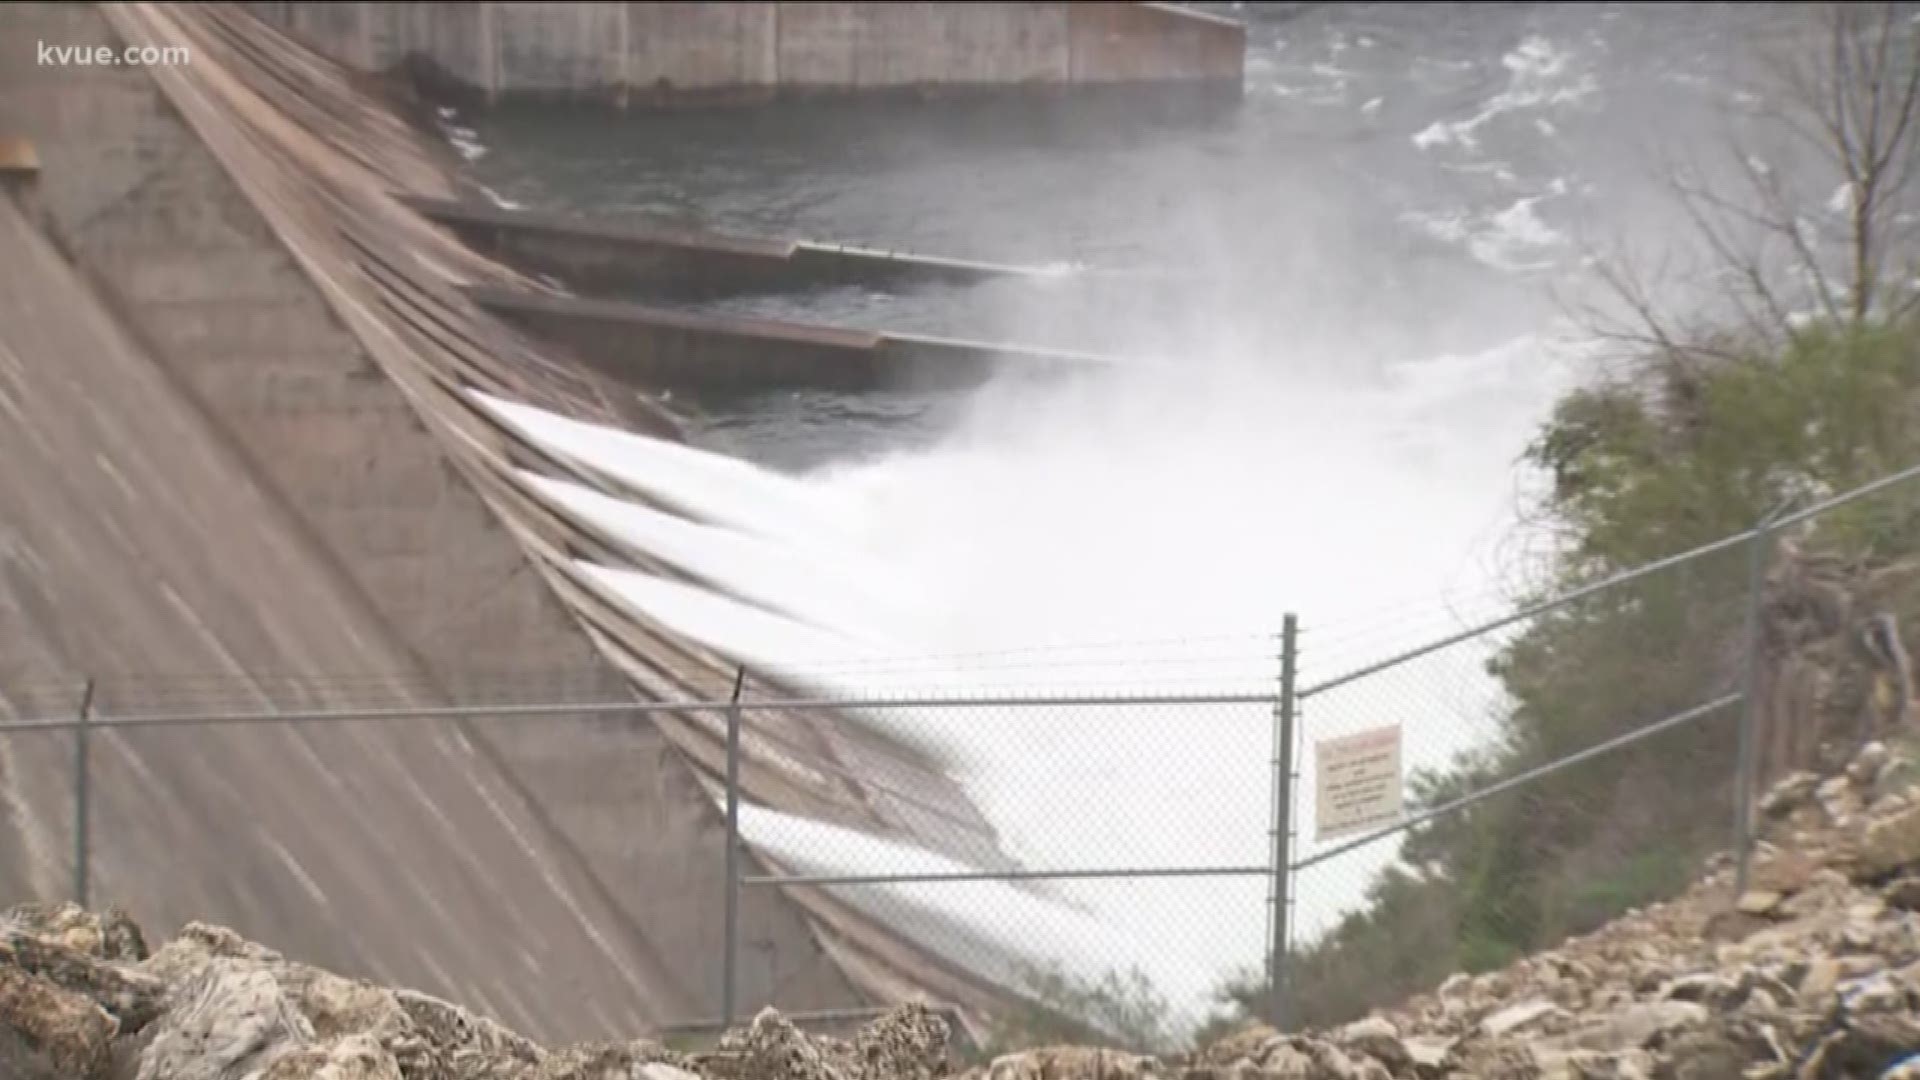 As of 5 p.m., four gates are open at Mansfield Dam sending water toward Lake Austin. By tomorrow, four more could open.